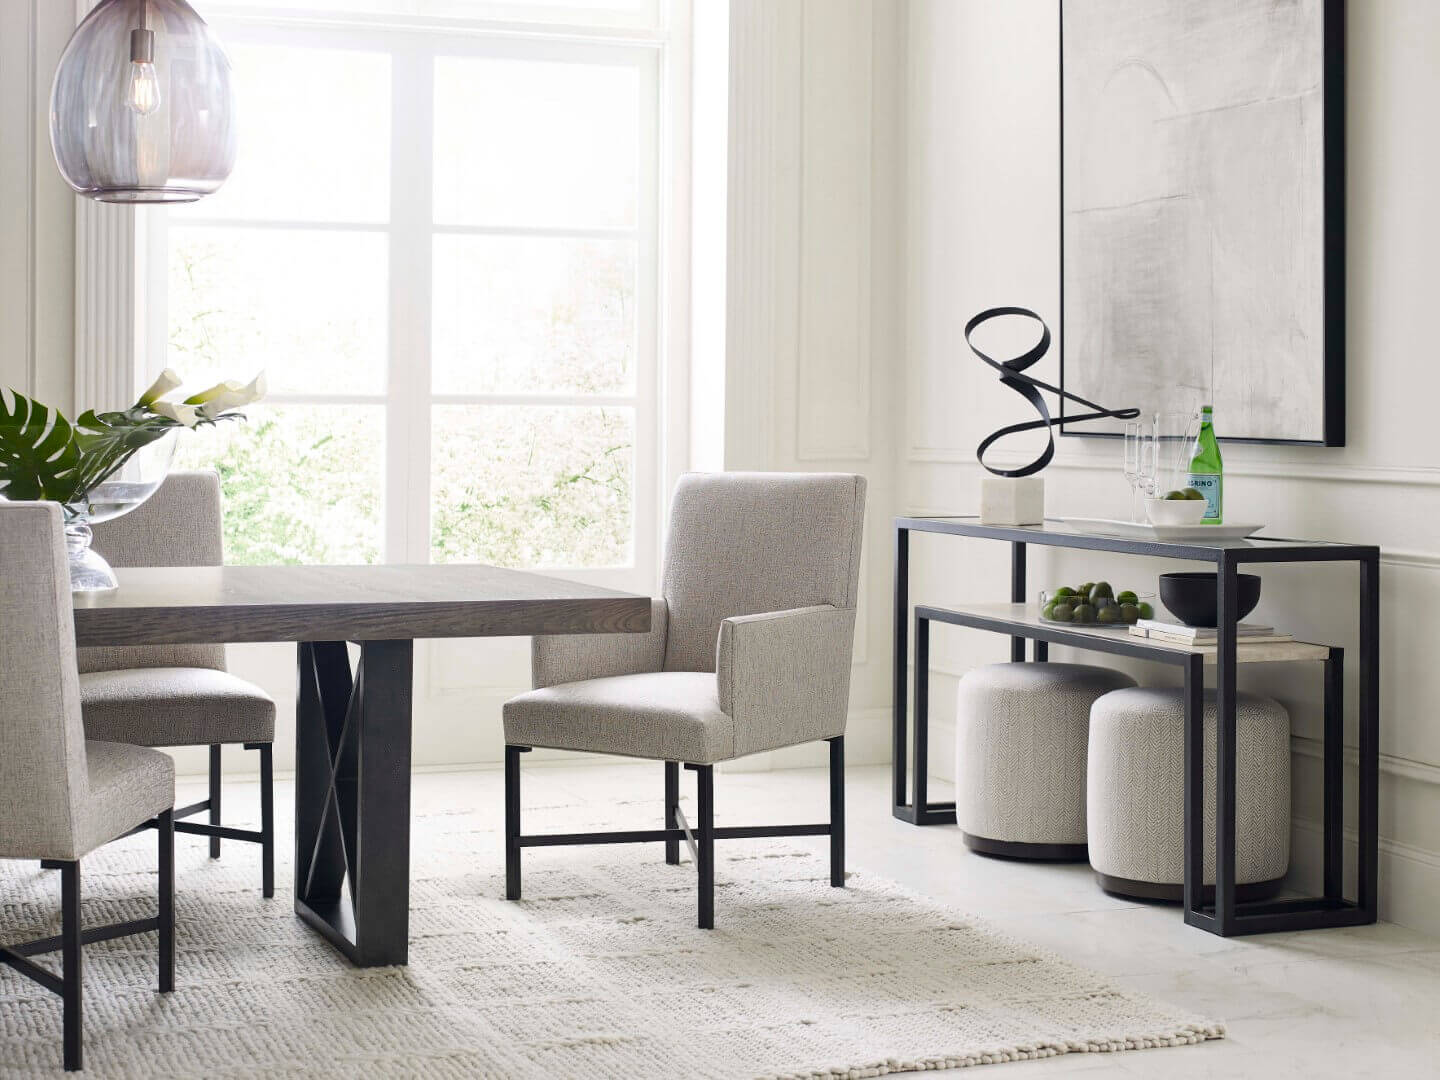 Vanguard_Halstead_Dining_Table_Glendale_Dining_Chairs